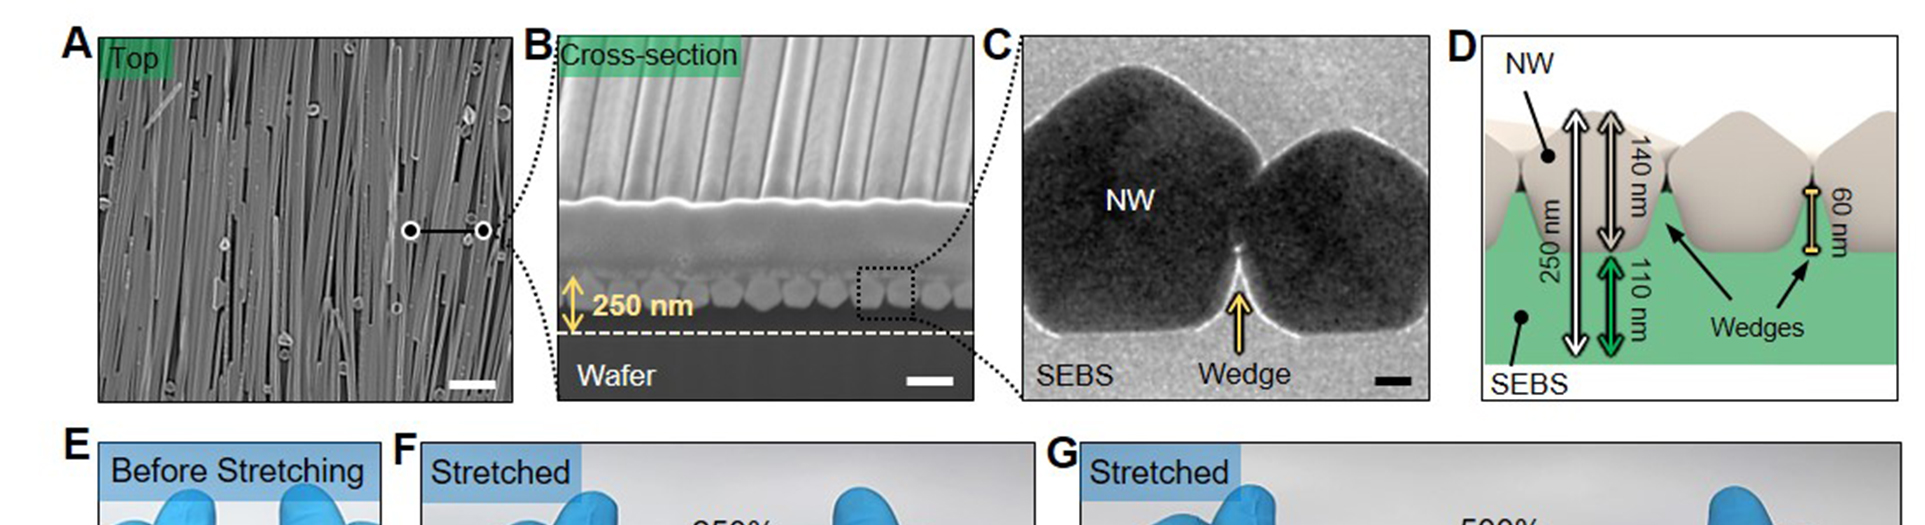 Highly conductive and elastic nanomembrane for skin electronics